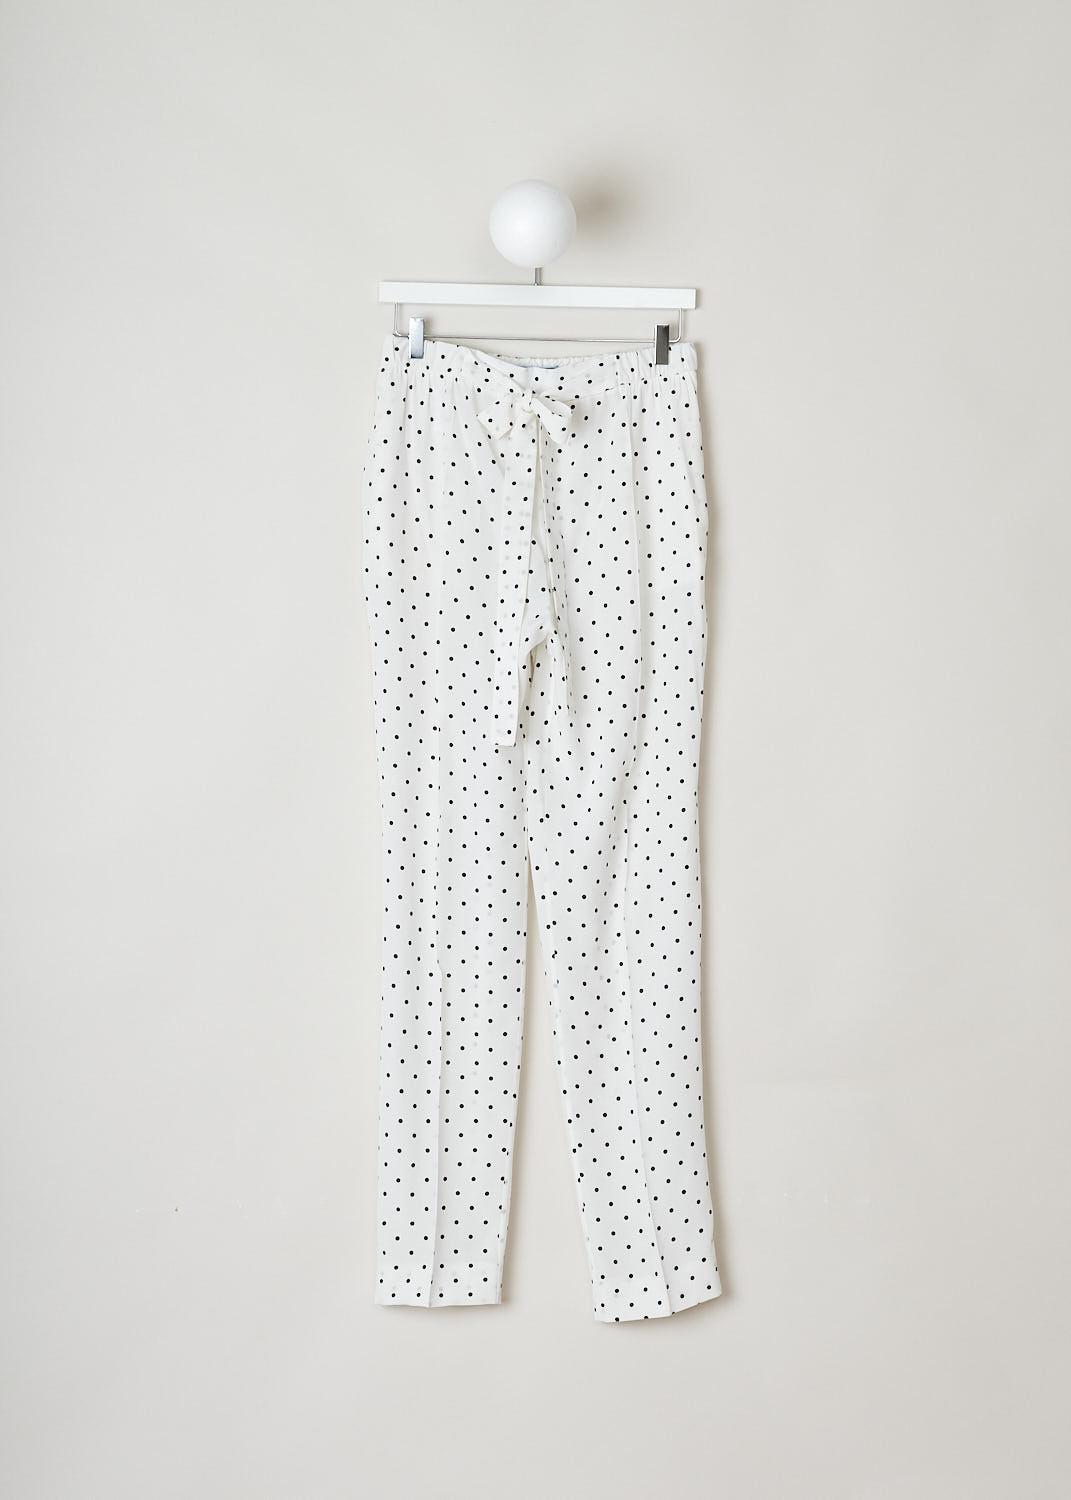 PRADA, WHITE SILK POLKA-DOT PRINT PANTS, CDC_POIS_P225EL_AVORIO_NERO, White, Print, Front, This fun polka-dot print pants comes with a belted waist. The fabric could be described as semi see through.  A concealed zipper closure can be found along the seam. The pants has slanted pockets on each side. 